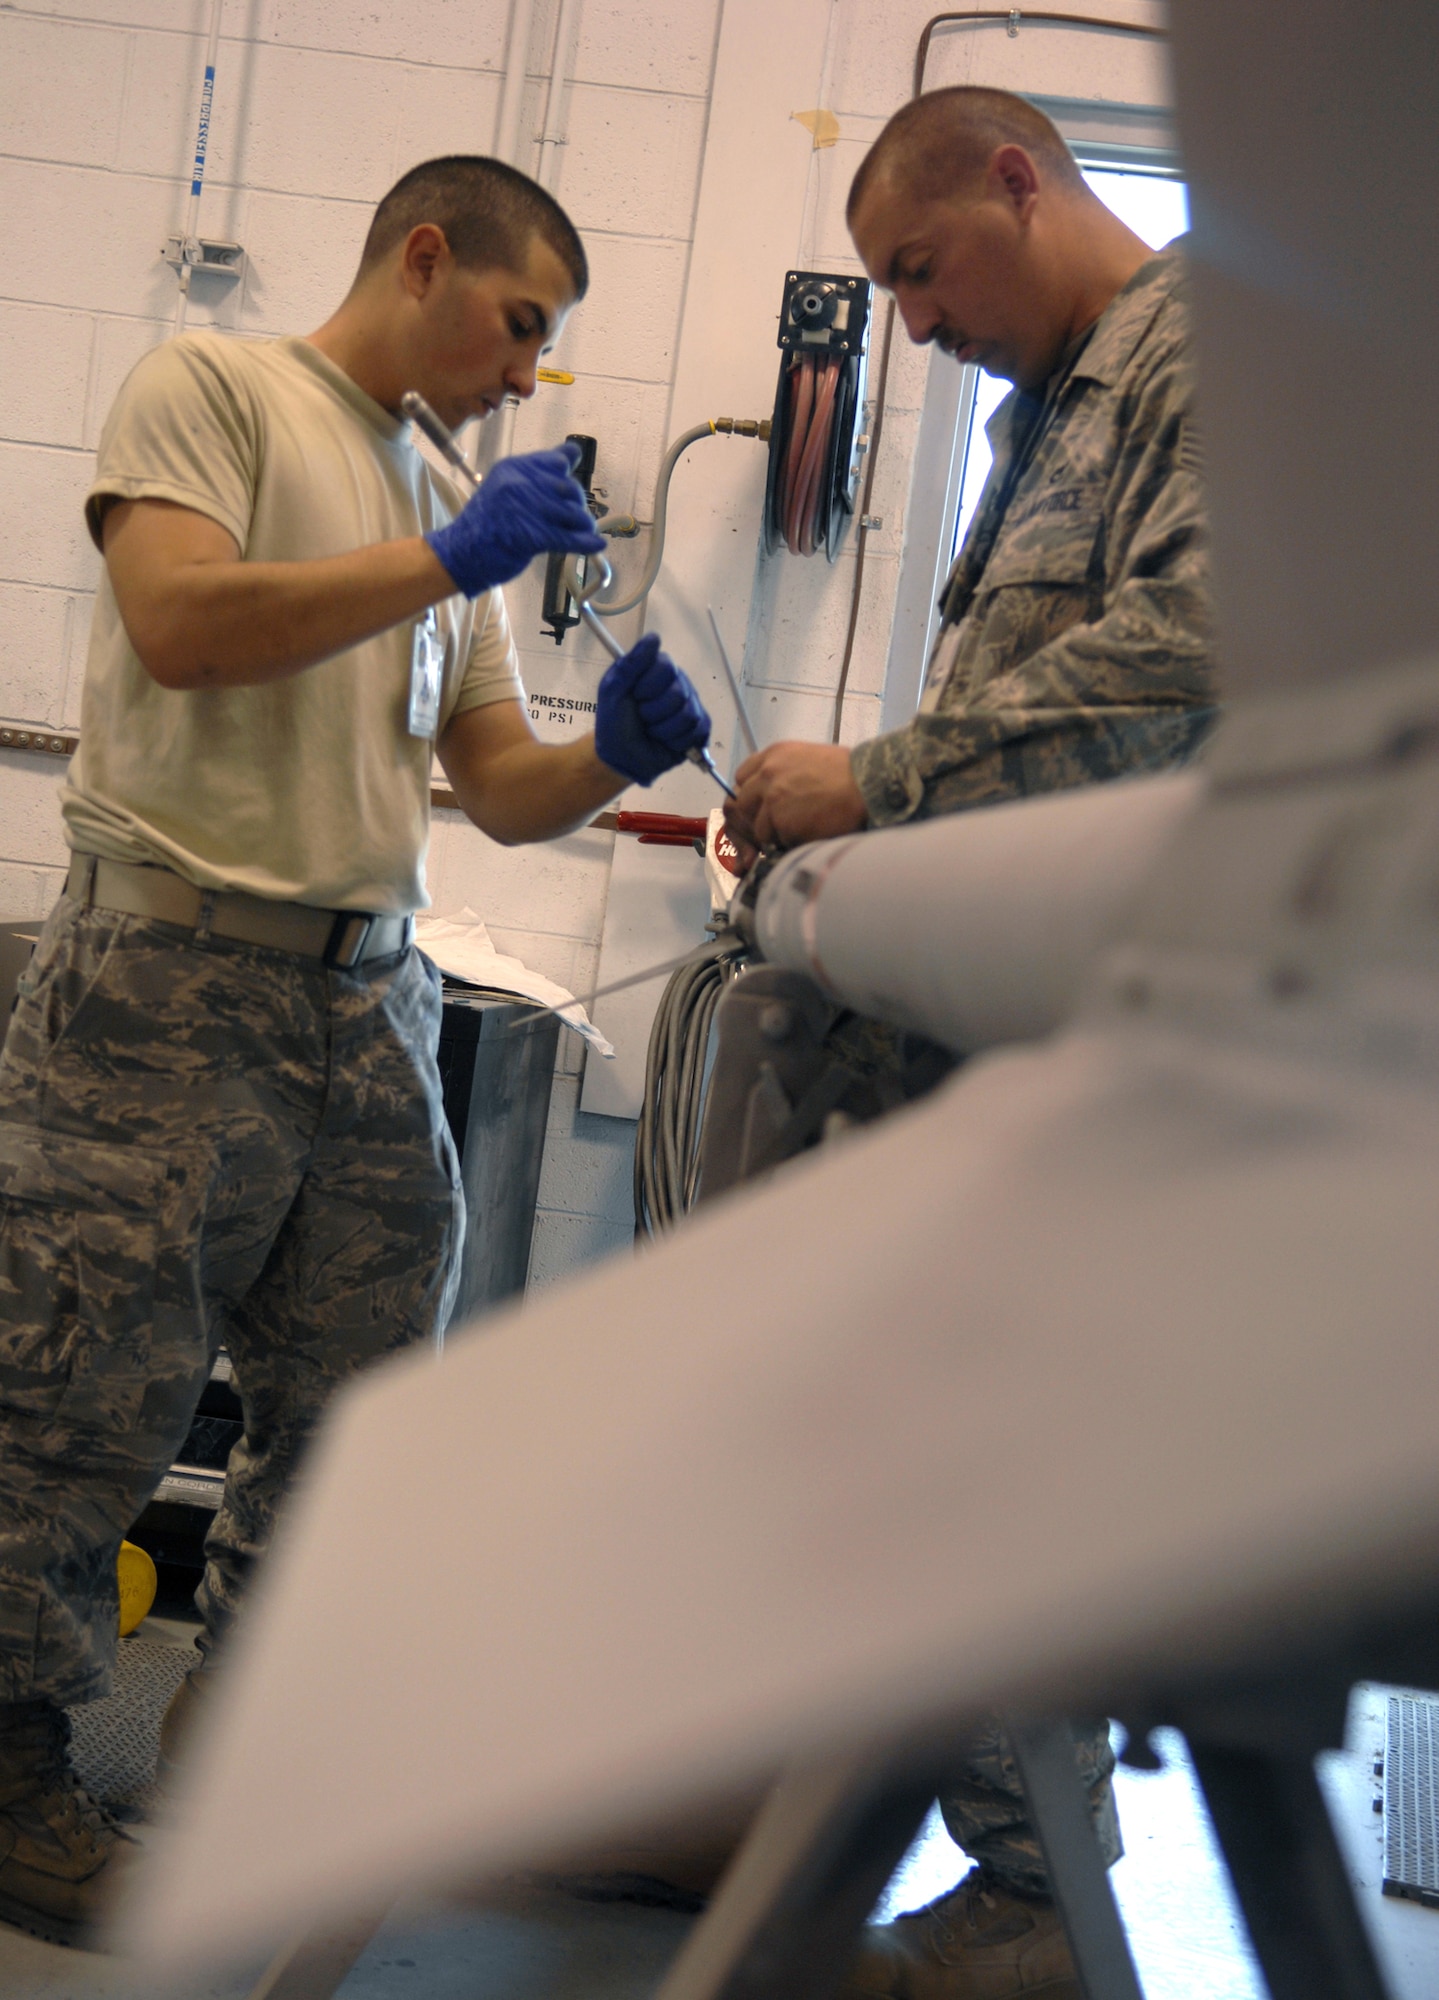 SEYMOUR JOHNSON AIR FORCE BASE, N.C. - Airman Ben Hutchinges and Staff Sgt. Douglas Retcher, both from the 4th Equipment Maintenance Squadron, attach fins to an AIM-9 missile here May 21. The fins are attached to the missle to give it more stability in flight. (U.S. Air Force photo by Airman 1st Class Gino Reyes)